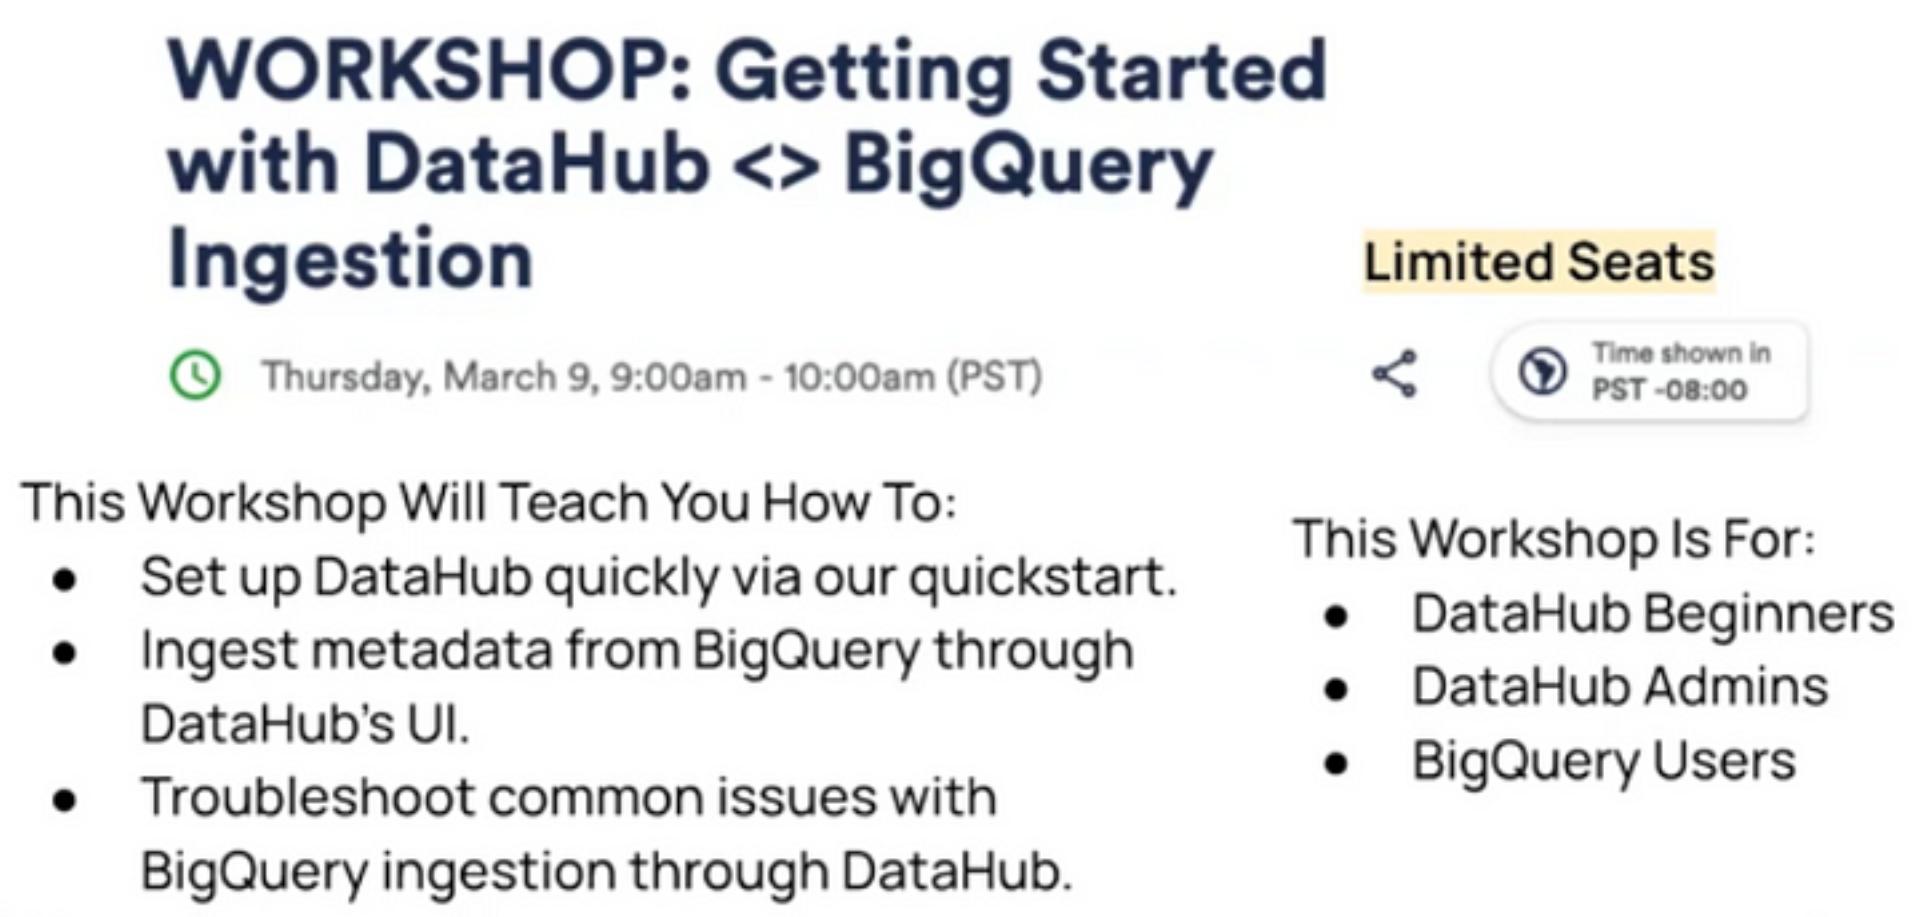 Workshop: Getting started with DataHub BigQuery Ingestion